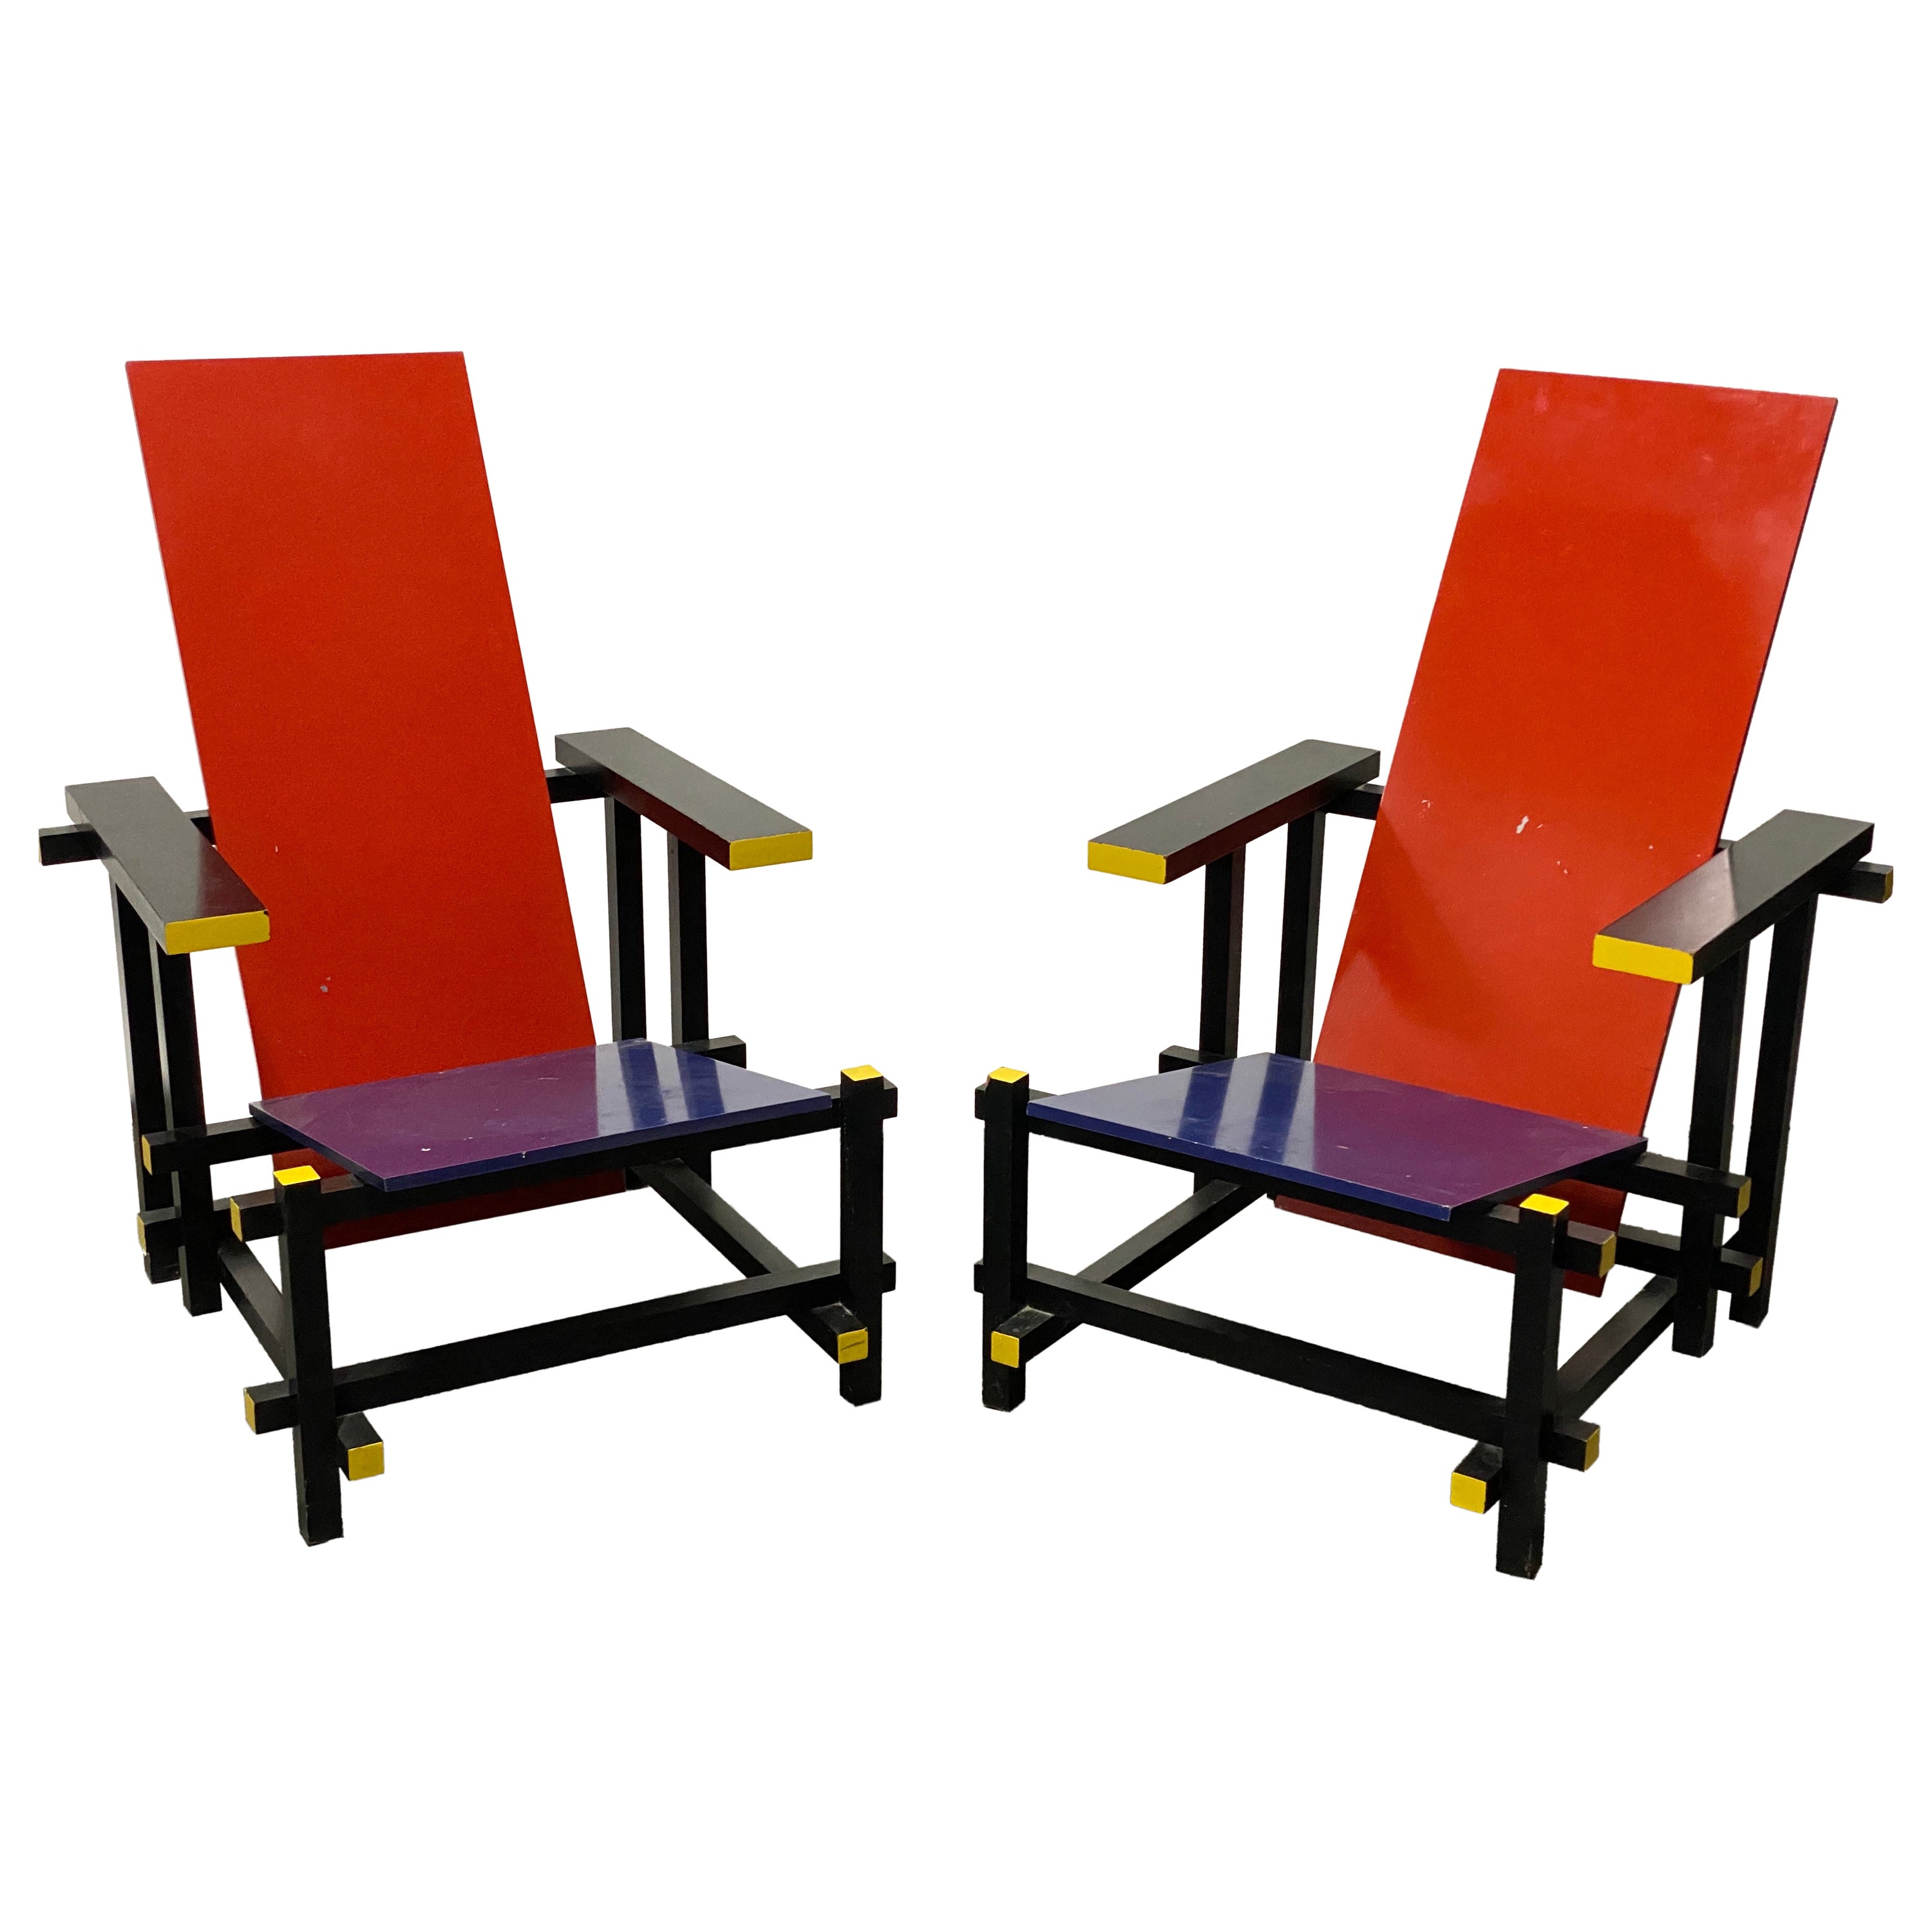 Gerrit Rietveld Red and Blue Lounge Chairs, A Pair For Sale